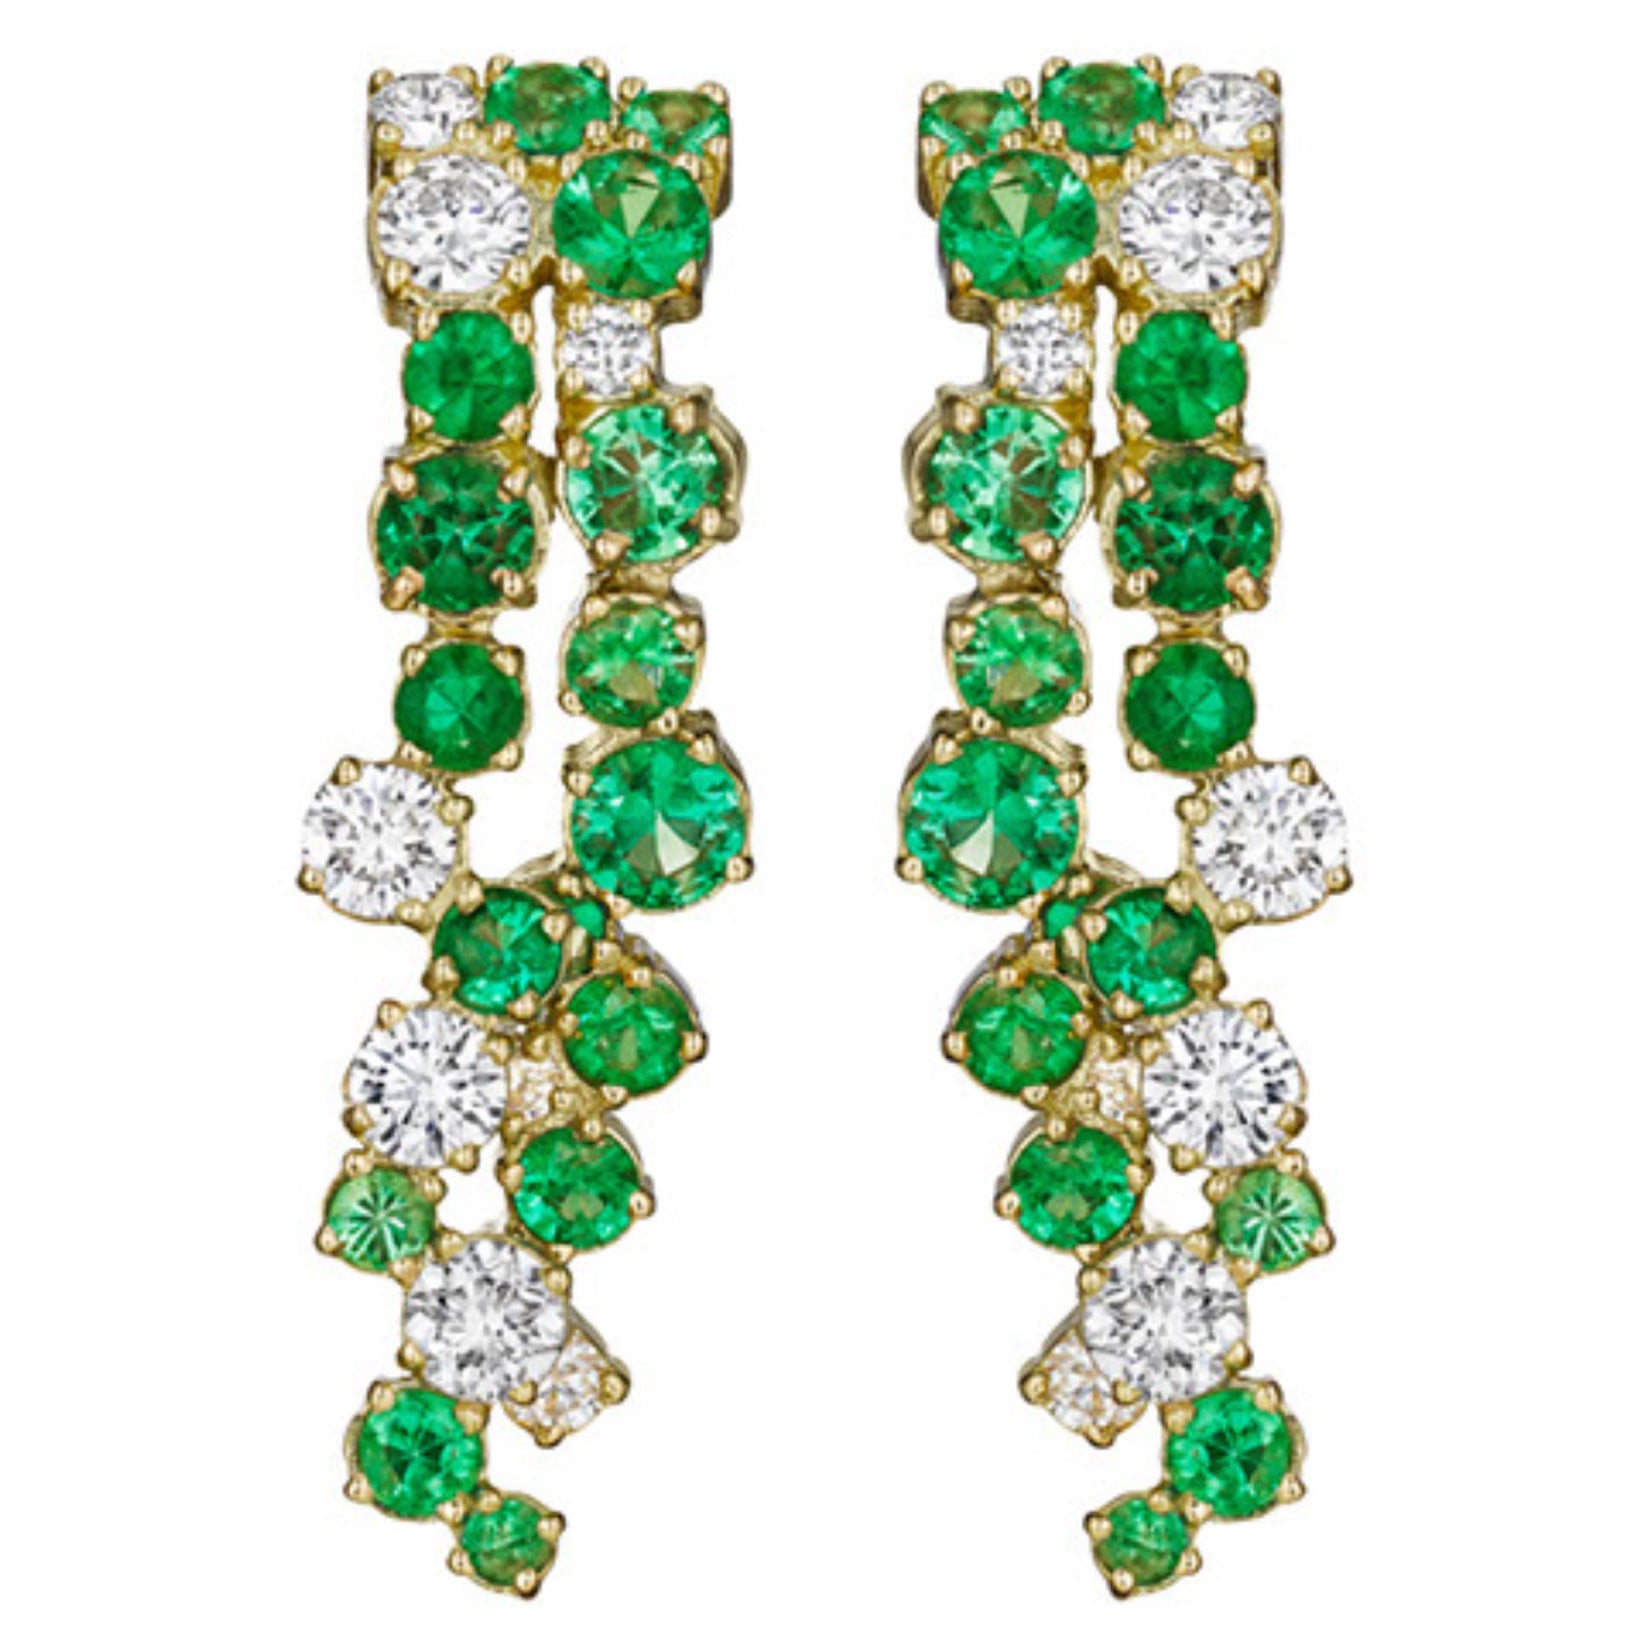 Melting Ice 18k Yellow Gold Emerald and Diamond Earrings by Madstone